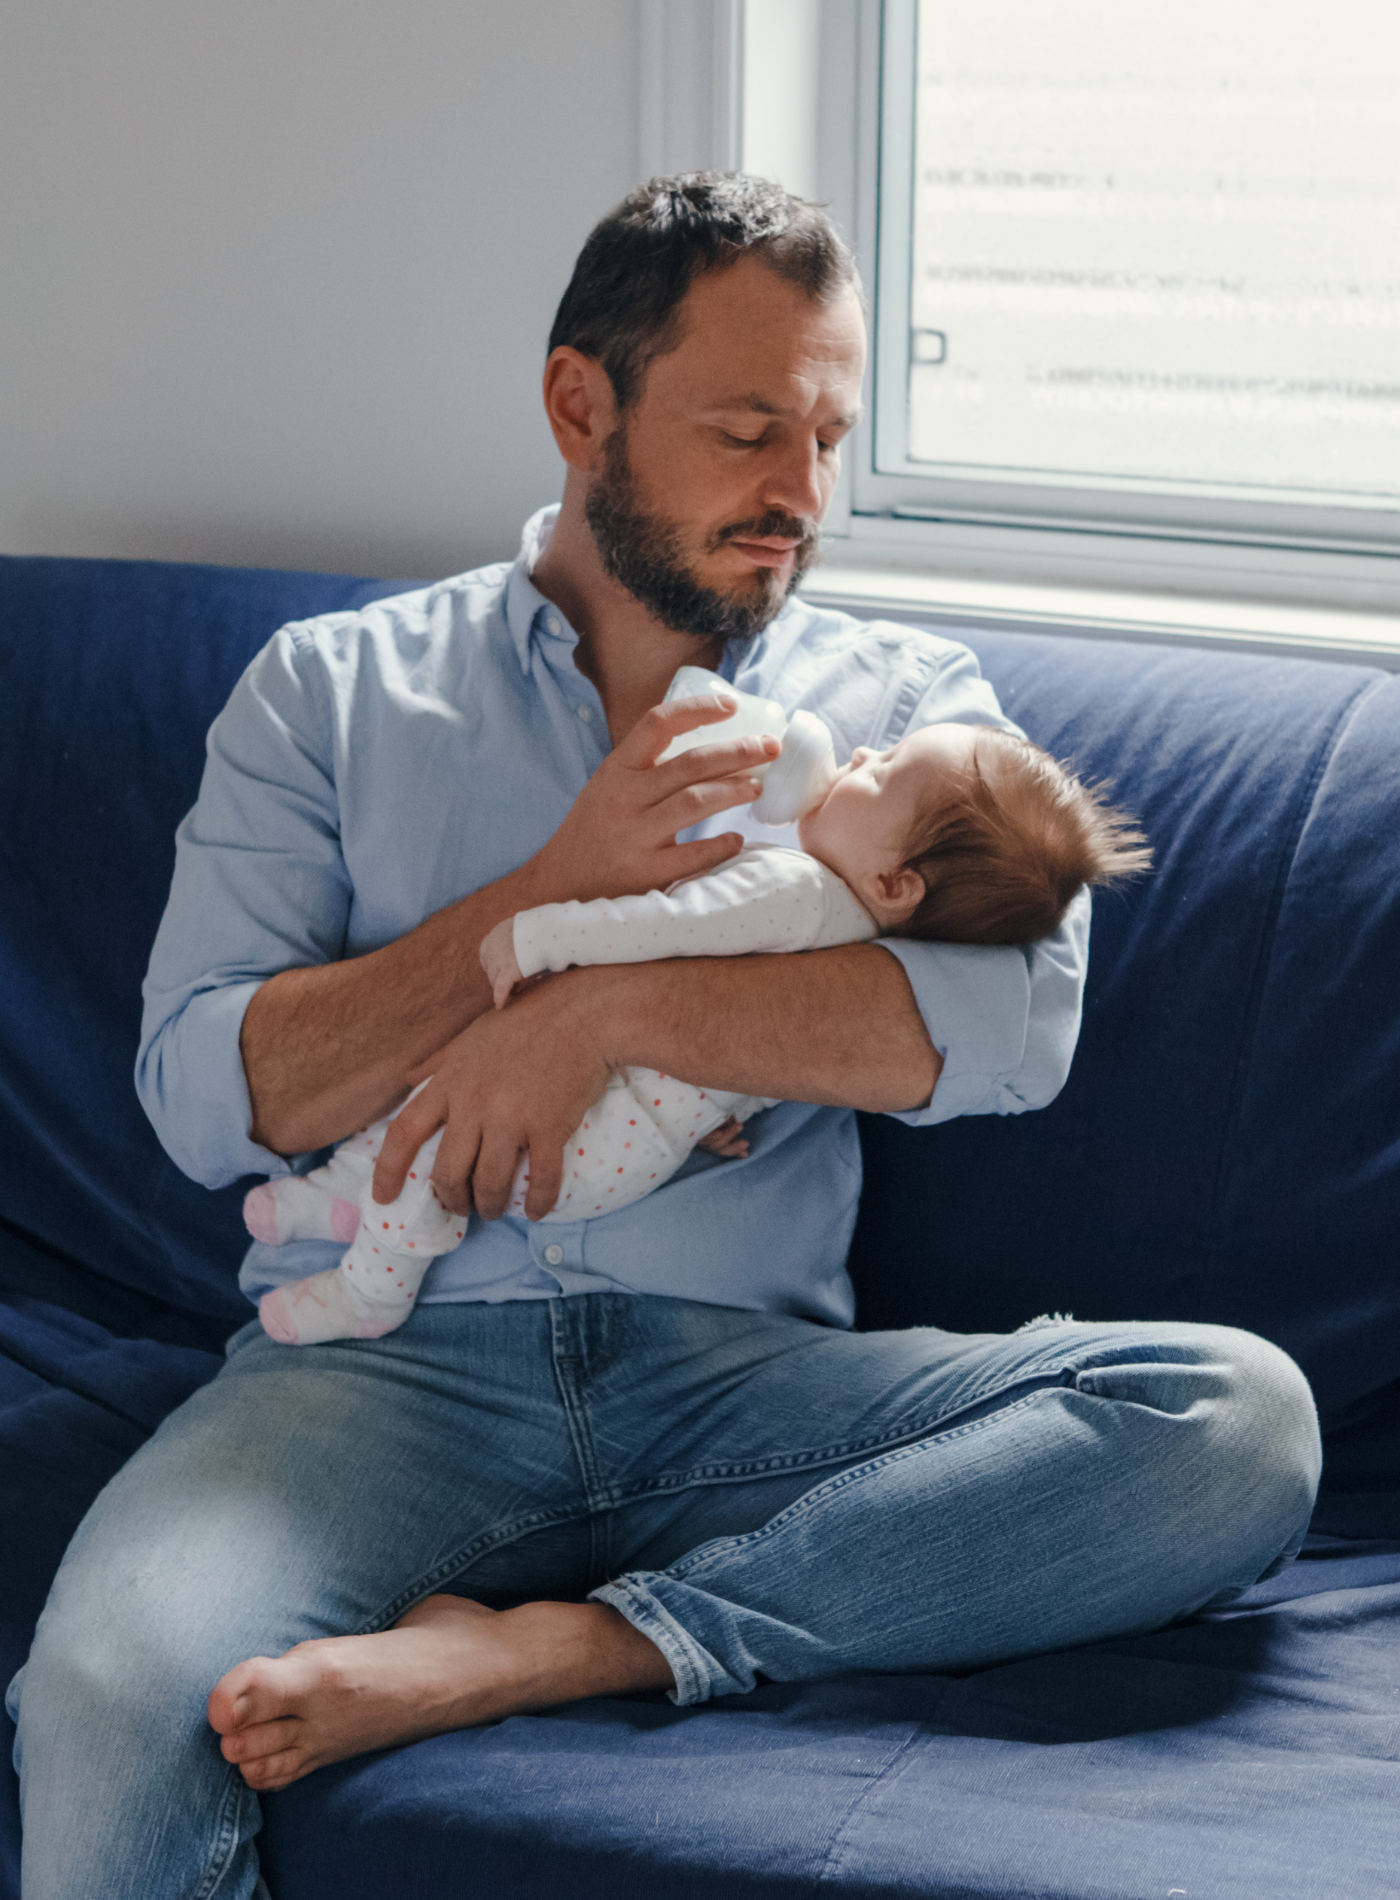 Formula-Fed - 5 Things You Need to Know About Bottle Feeding A Baby